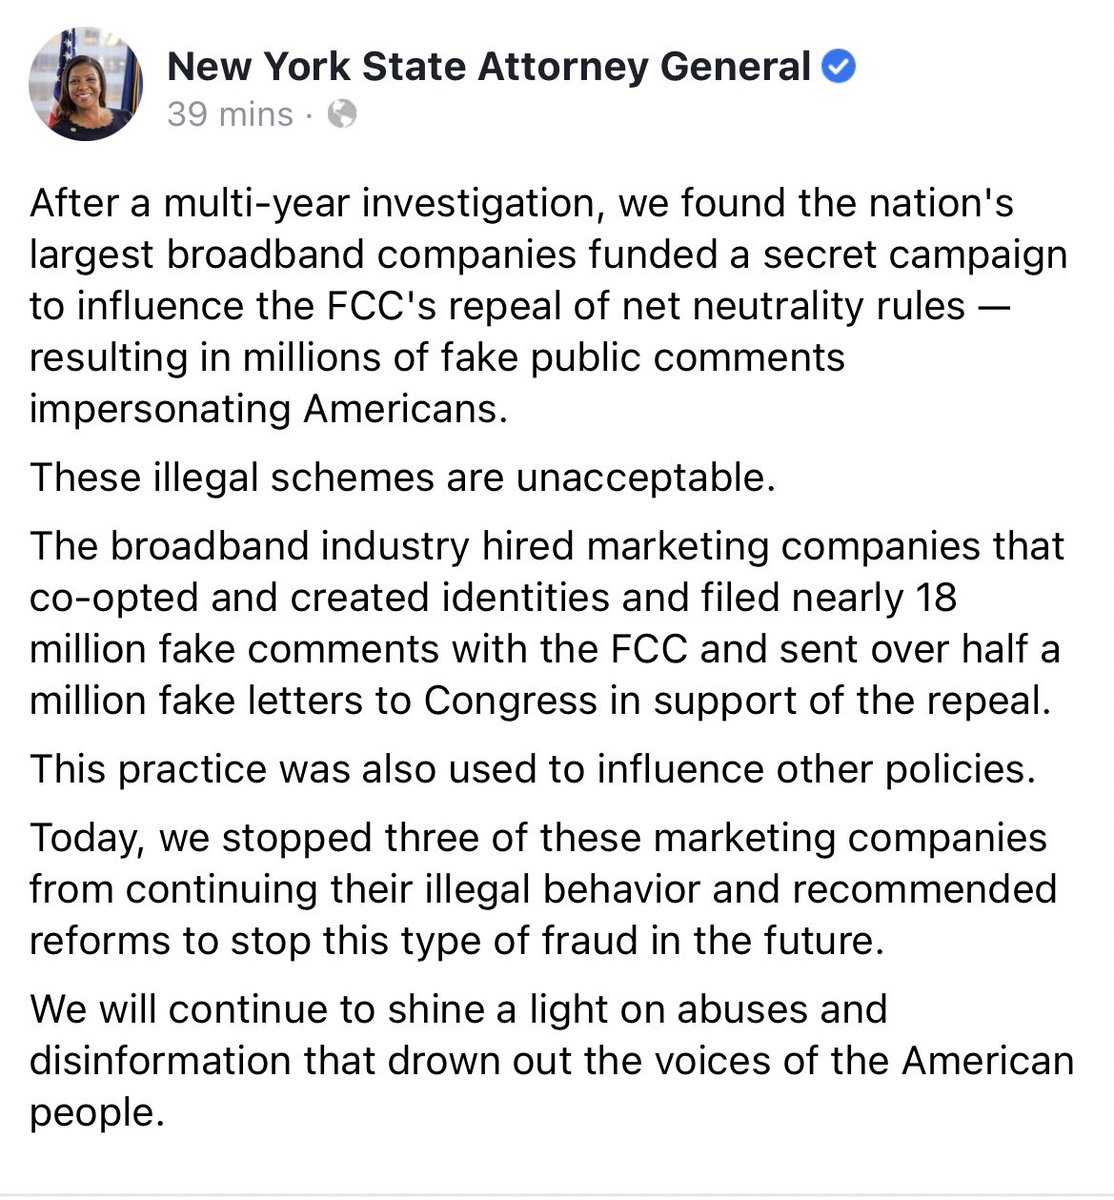 NEW (via NY AG Letitia James): “After a multi-year investigation, we found the nation's largest broadband companies funded a secret campaign to influence the FCC's repeal of net neutrality rules — resulting in millions of fake public comments impersonating Americans...”